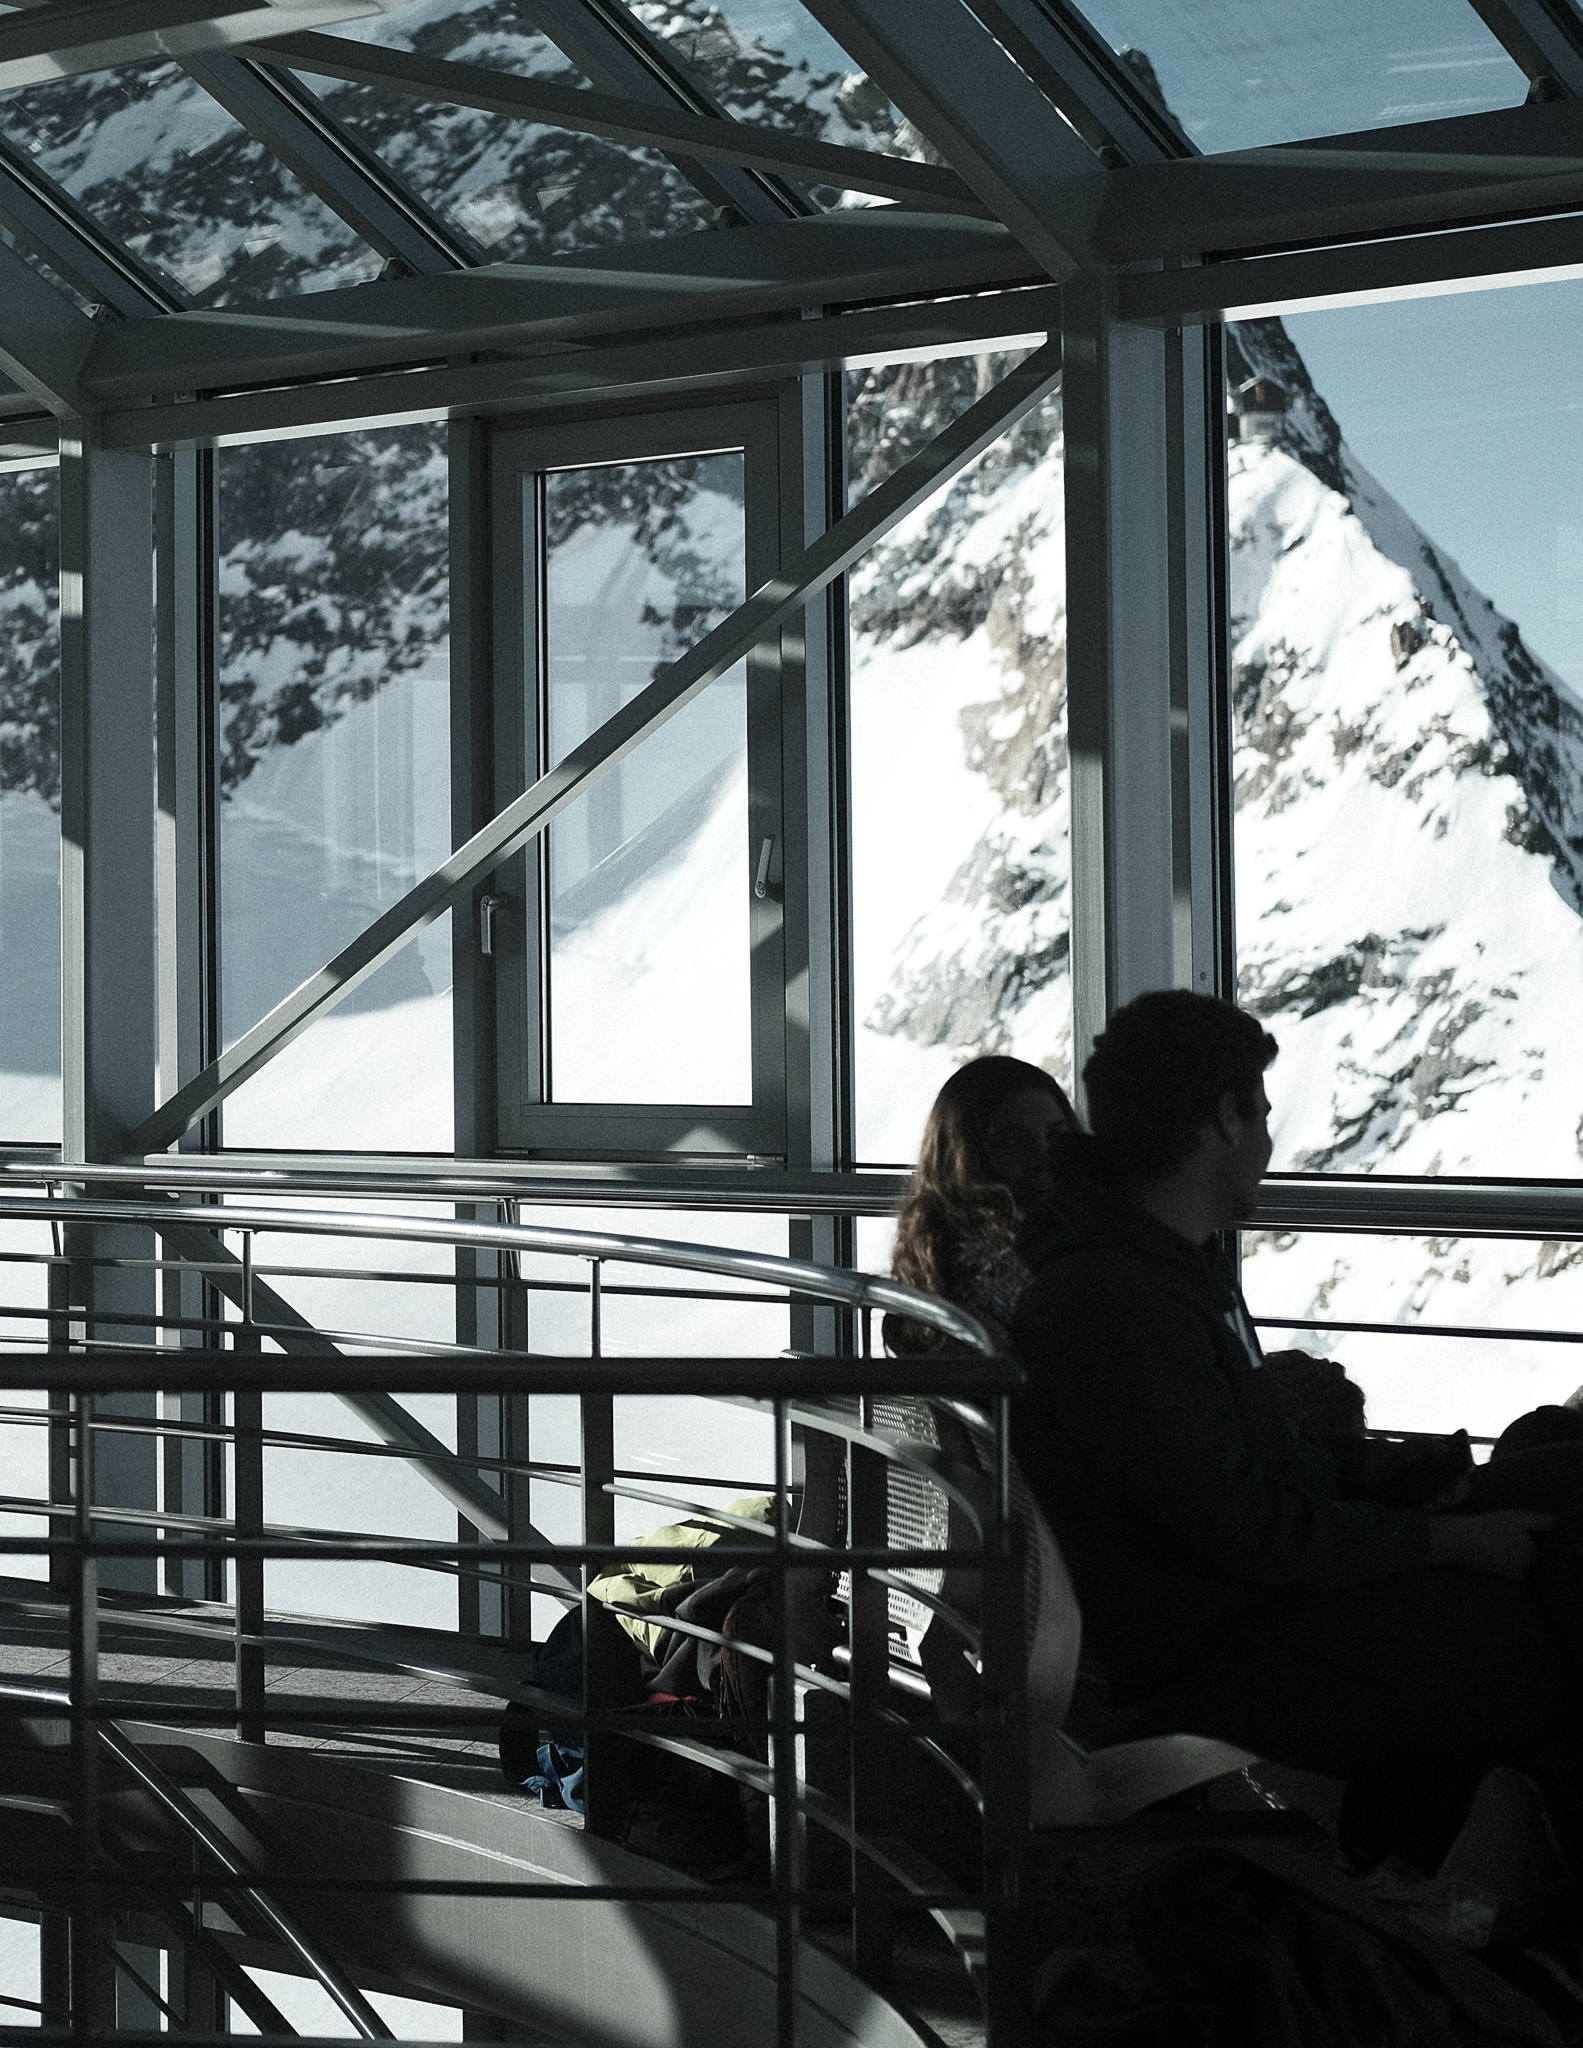 Two people sitting inside the Piz Gloria restaurant, made of large glass windows, with views onto the snowy Swiss Alps mountains just outside.